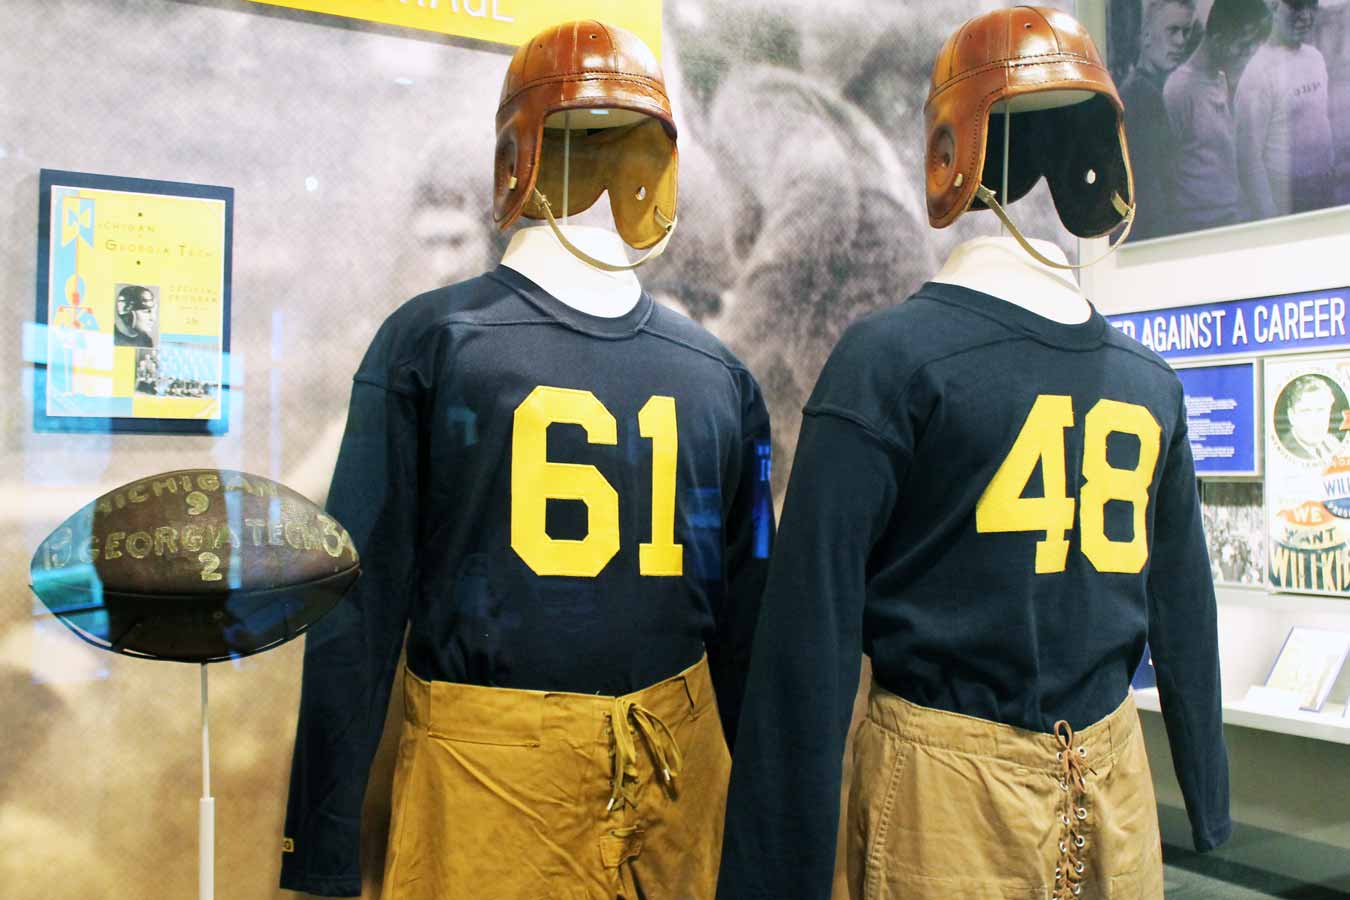 Vintage University of Michigan Football Uniforms at the Gerald R. Ford Presidential Museum /// Gerald R. Ford Presidential Museum: Legacy Of An Unelected President - (via Wading in Big Shoes)